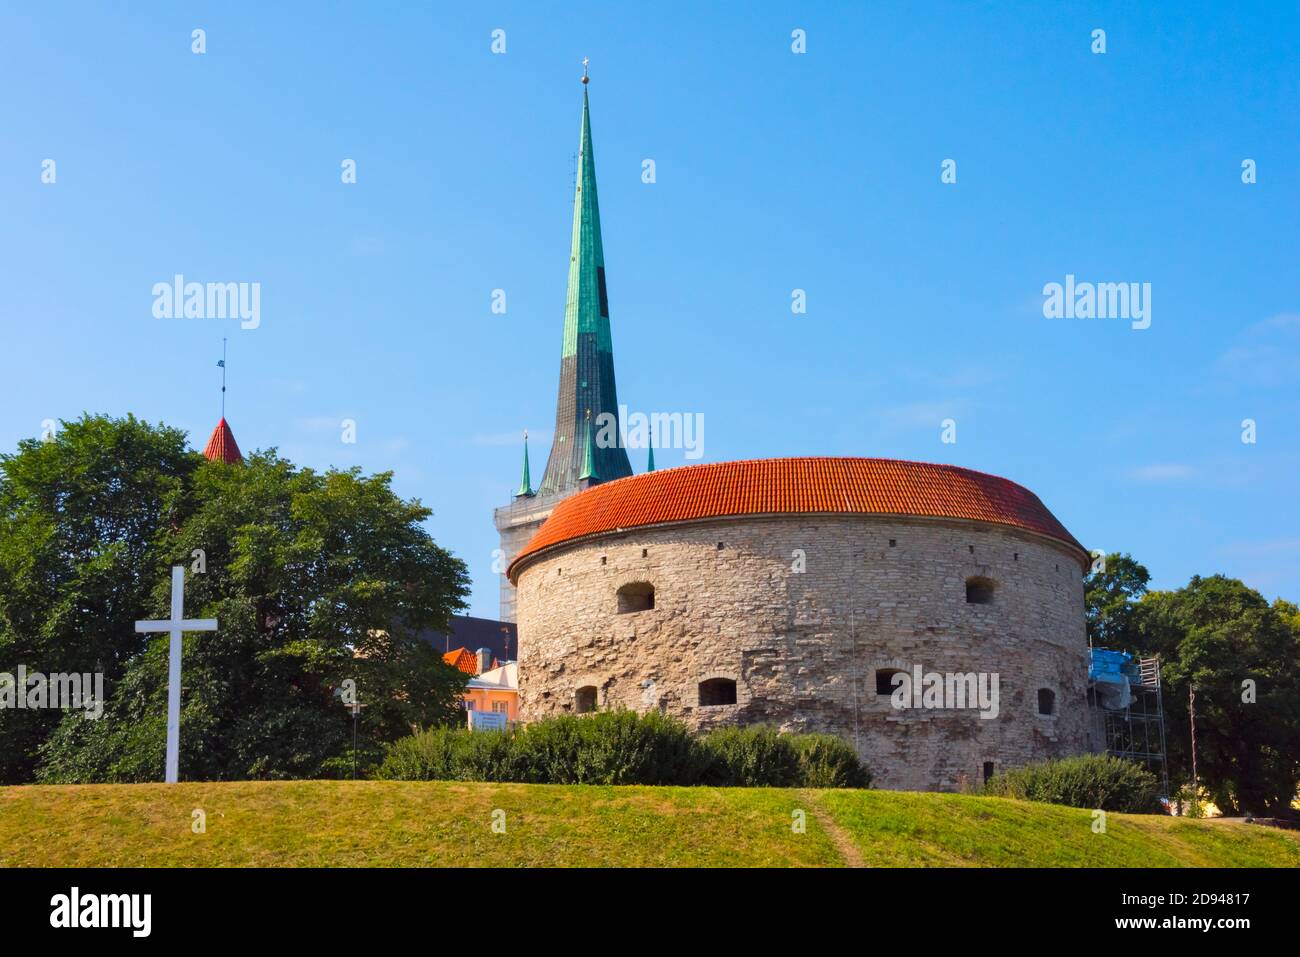 Spire of St. Olaf's church and Fat Margret Tower, Tallinn, Estonia Stock Photo